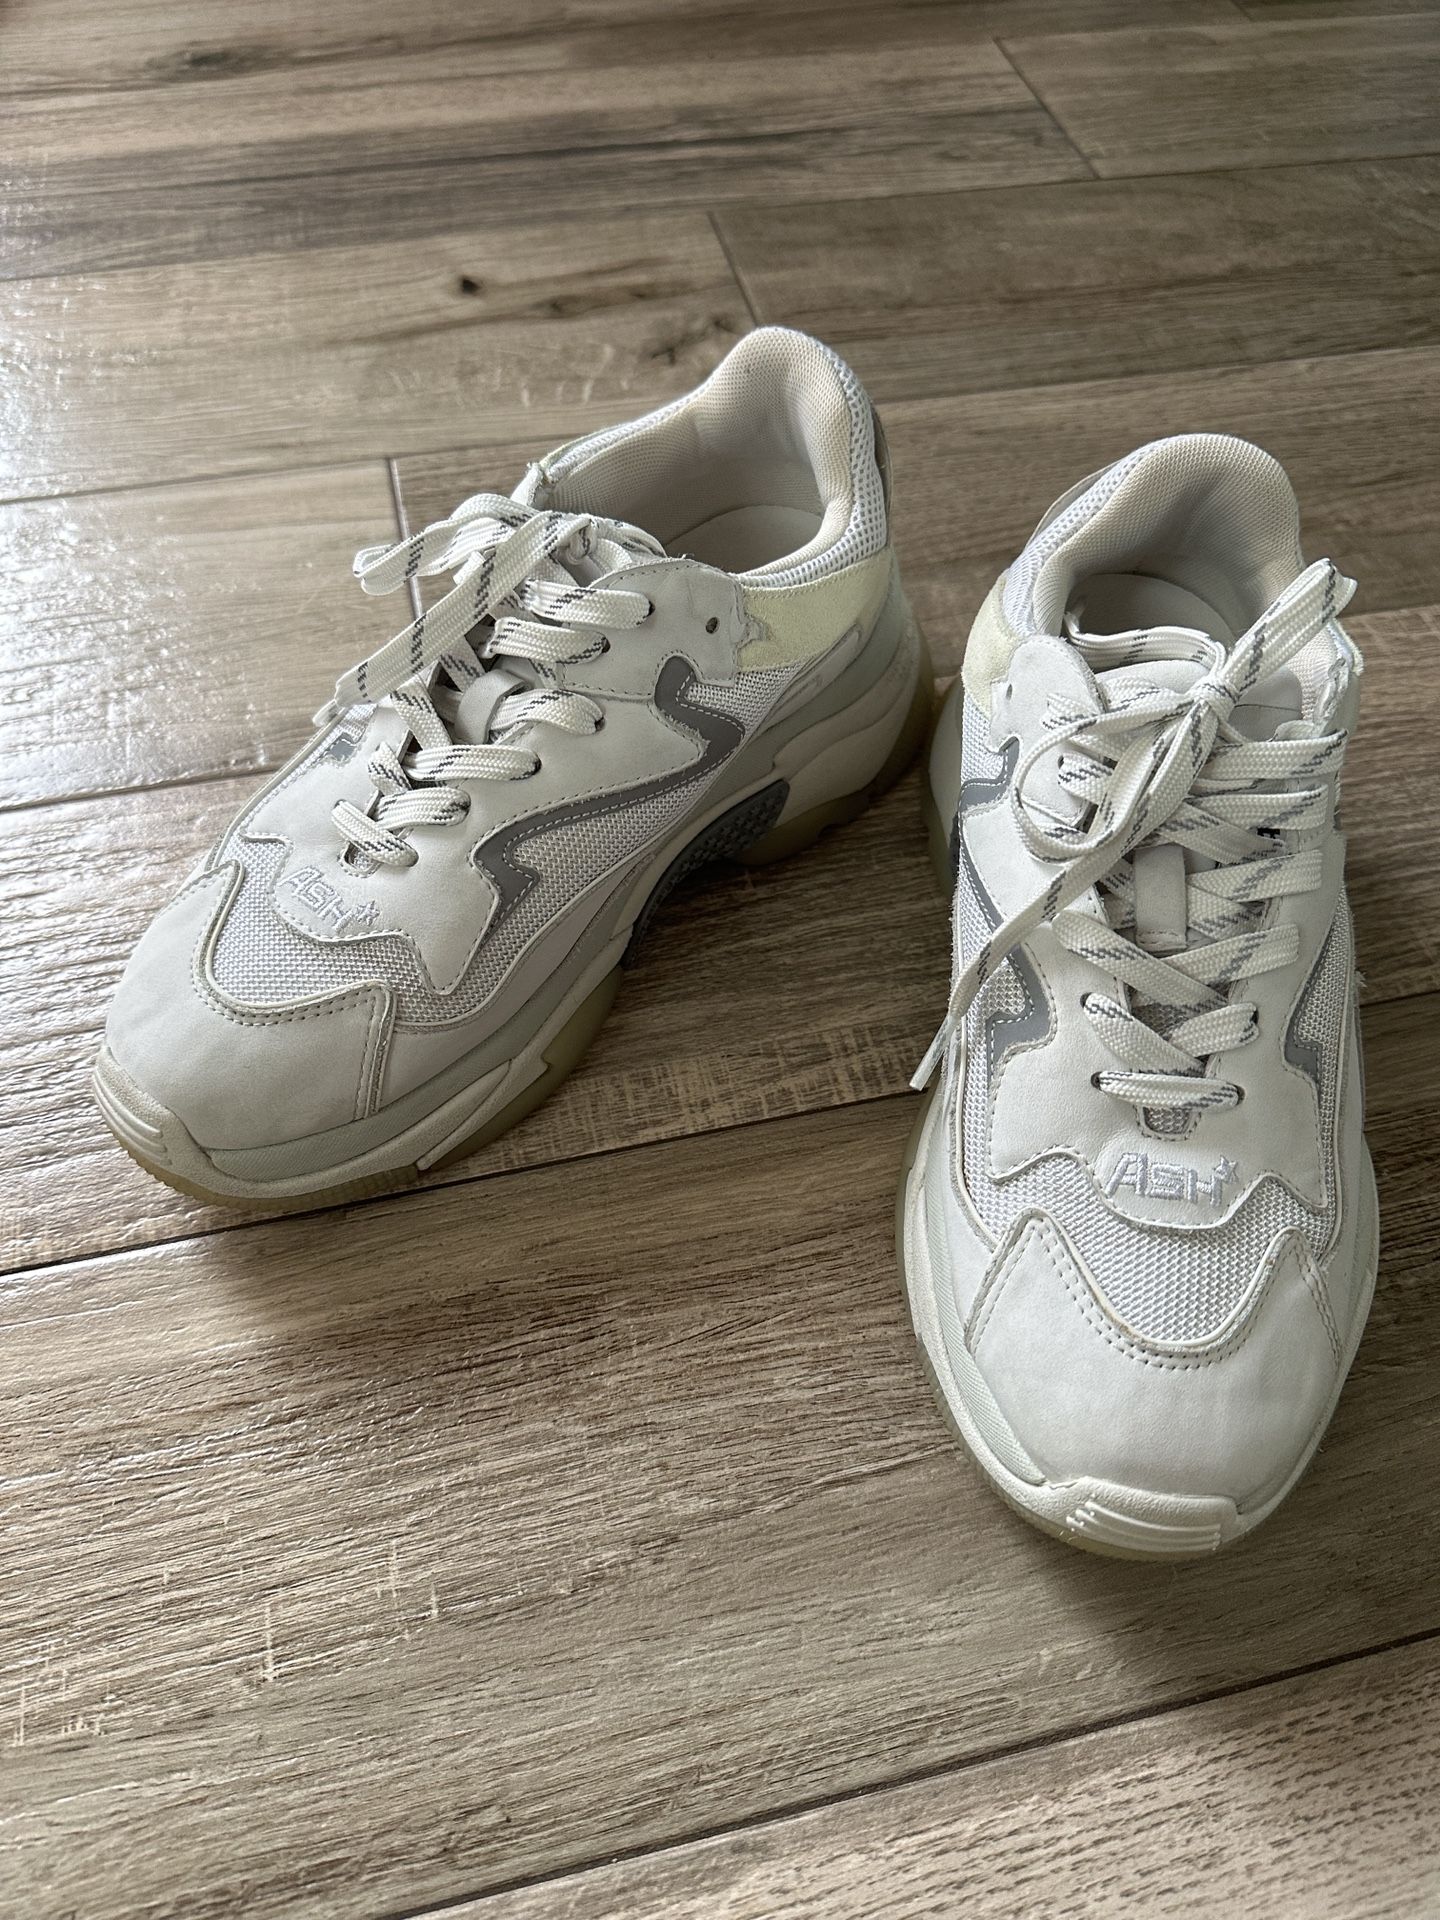 Ash Addict low-top sneakers, Women Size 37, Grey White for Sale in San Gabriel, CA - OfferUp